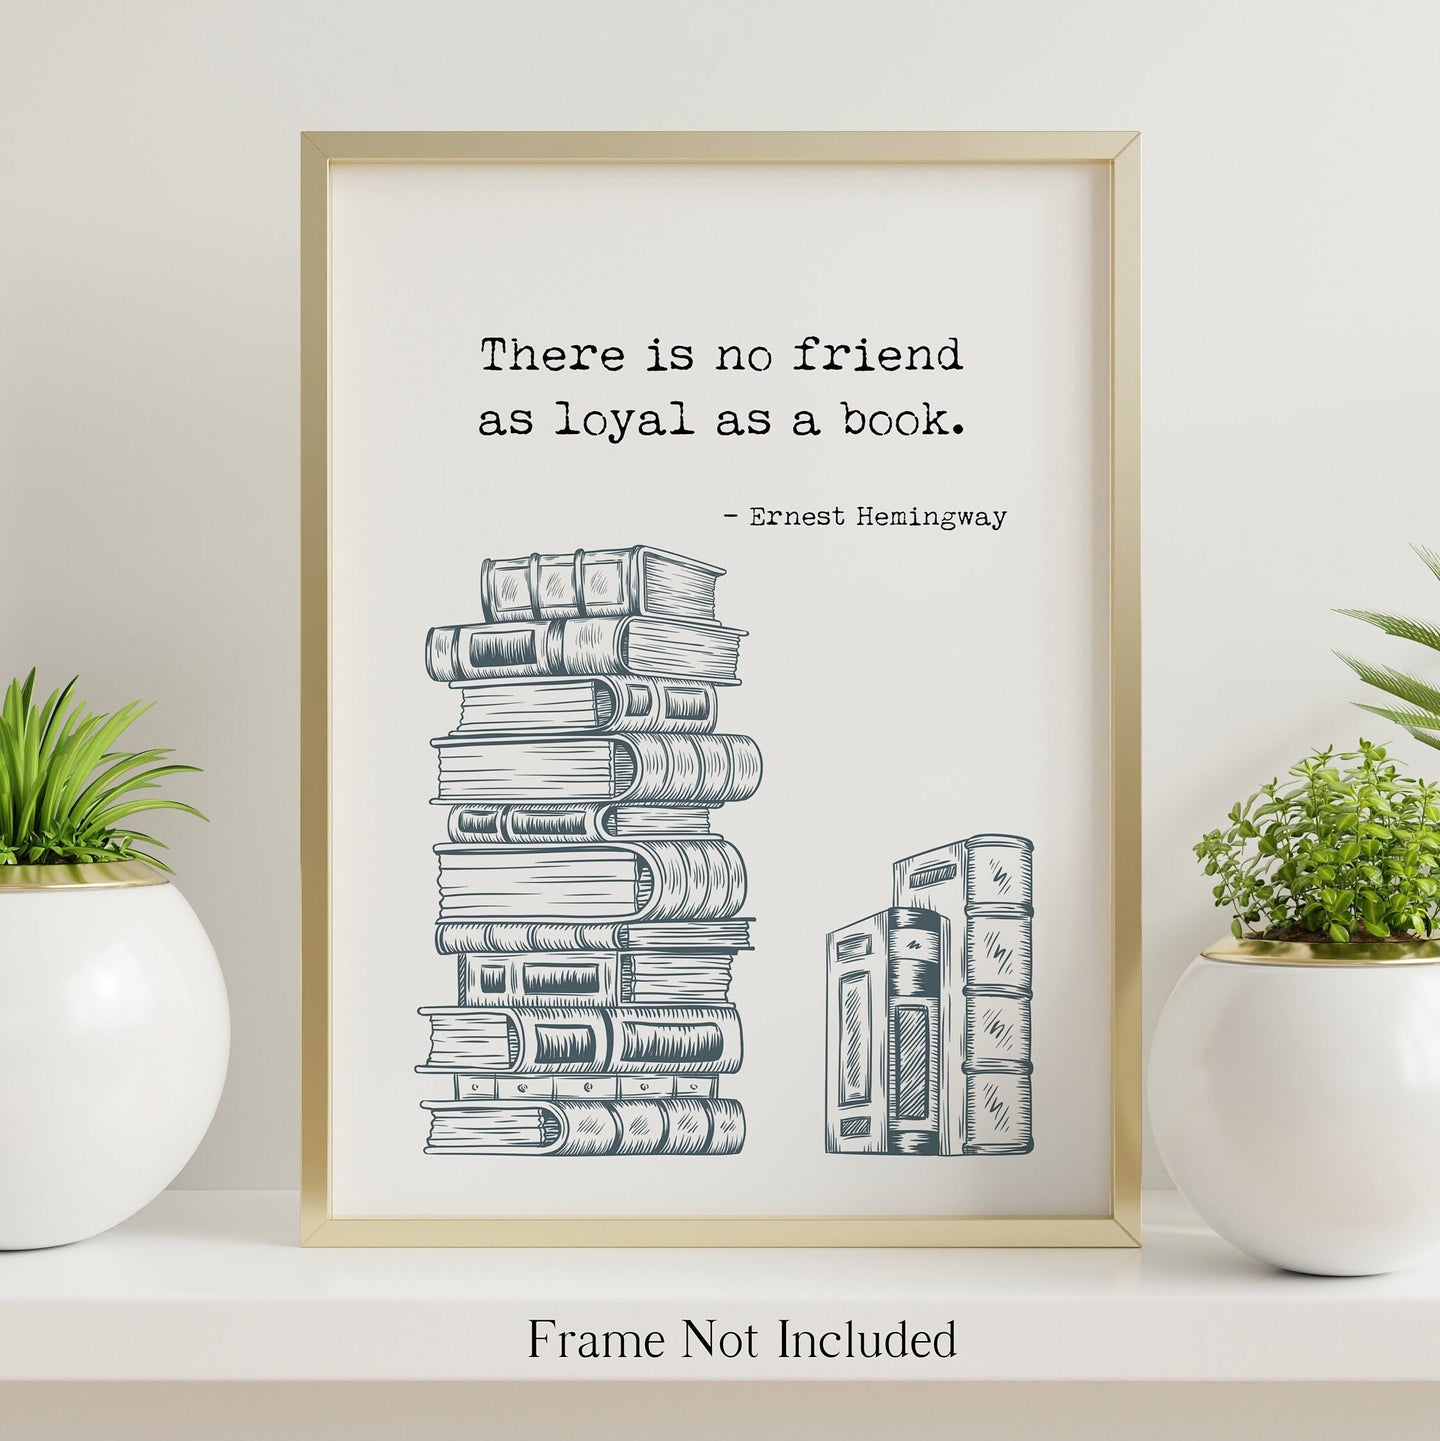 Hemingway Quote - There is no friend as loyal as a book - Illustrated Book Stack Ernest Hemingway quote - Reading Nook Decor